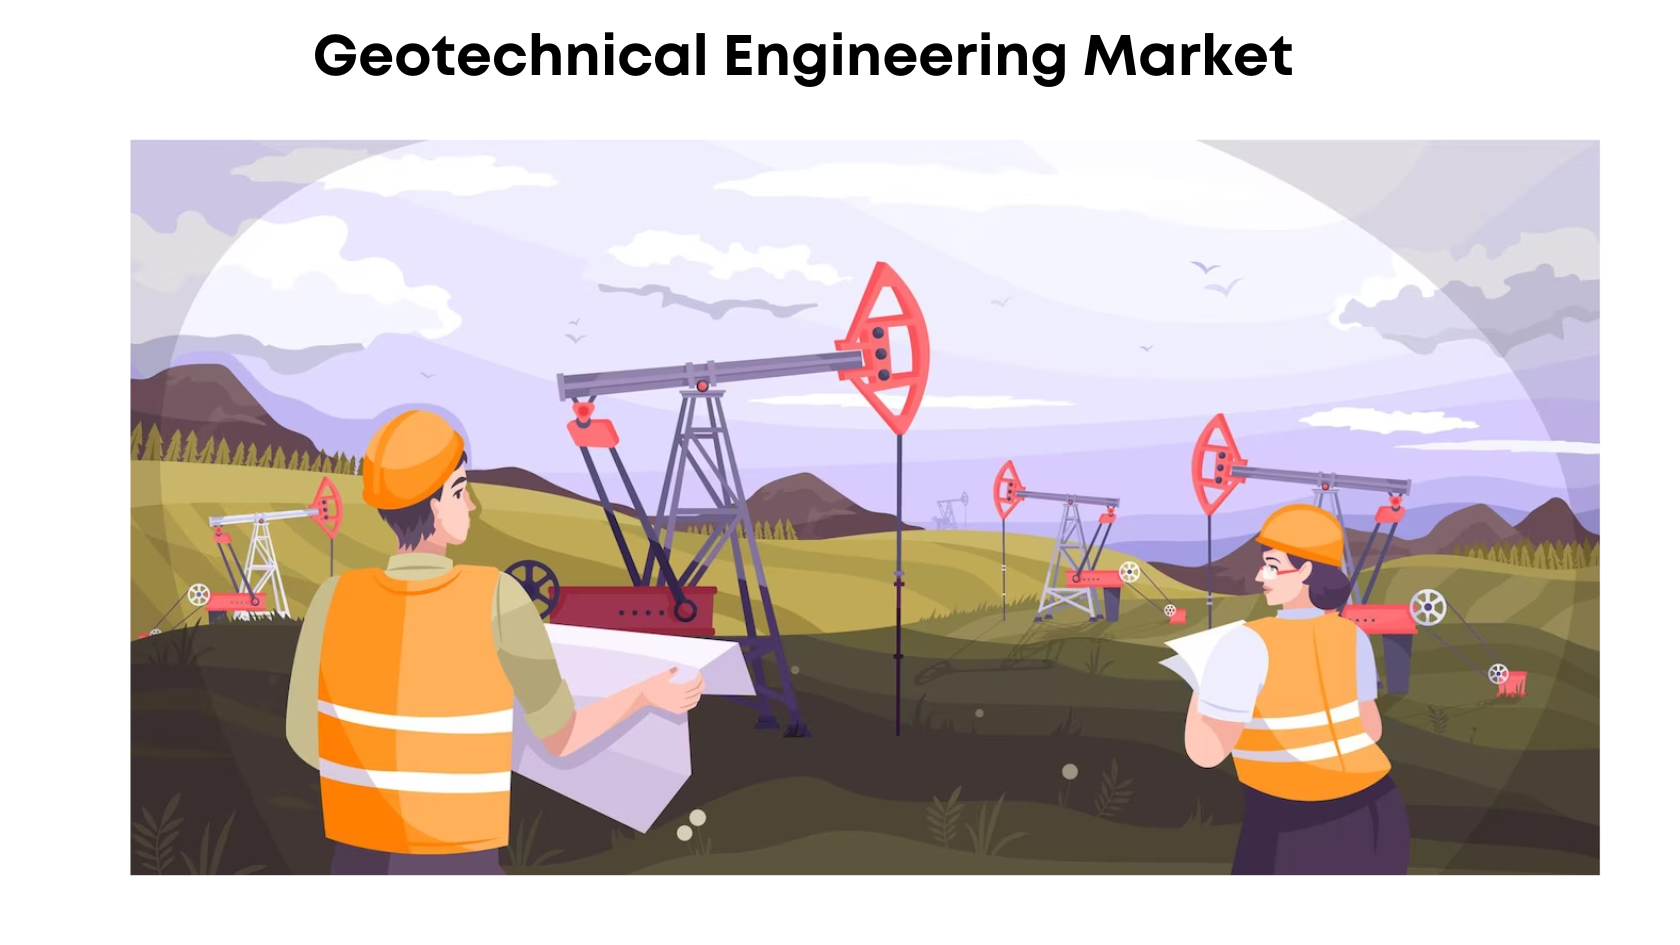 Geotechnical Engineering Market Sales to Top USD 4.5 billion in Revenues by 2032 at a CAGR of 6.6%